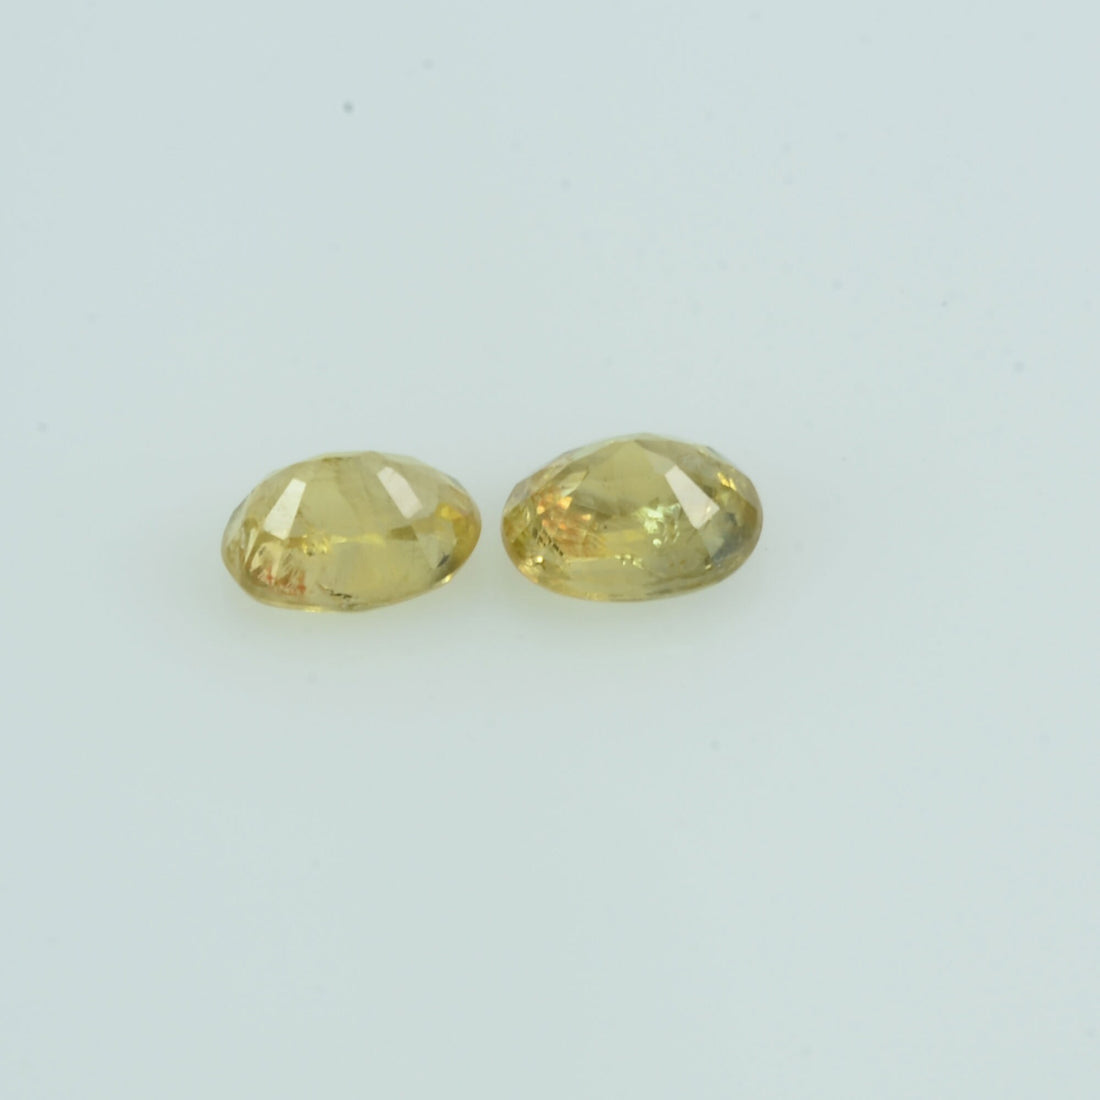 0.66 cts Natural Fancy Sapphire Loose Pair Gemstone Oval Cut